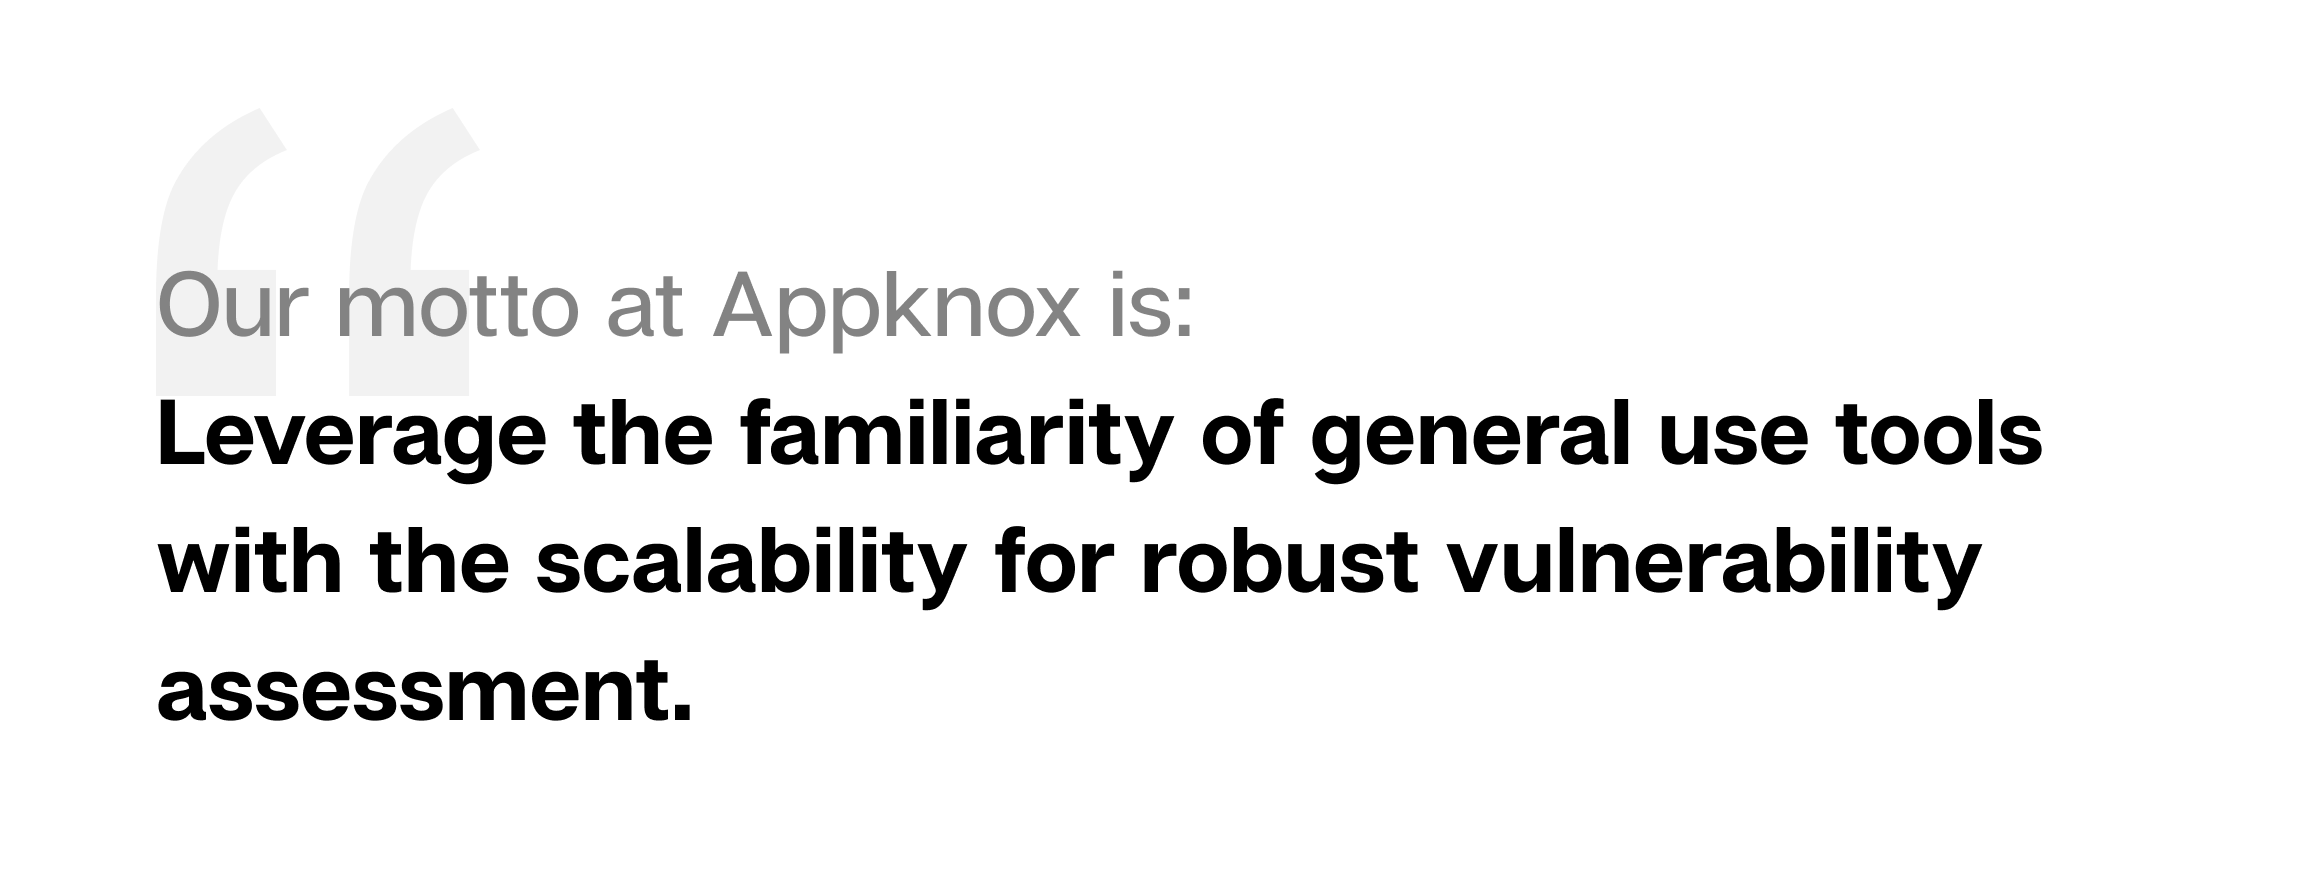 How to simplify mobile application security testing - Appknox's motto